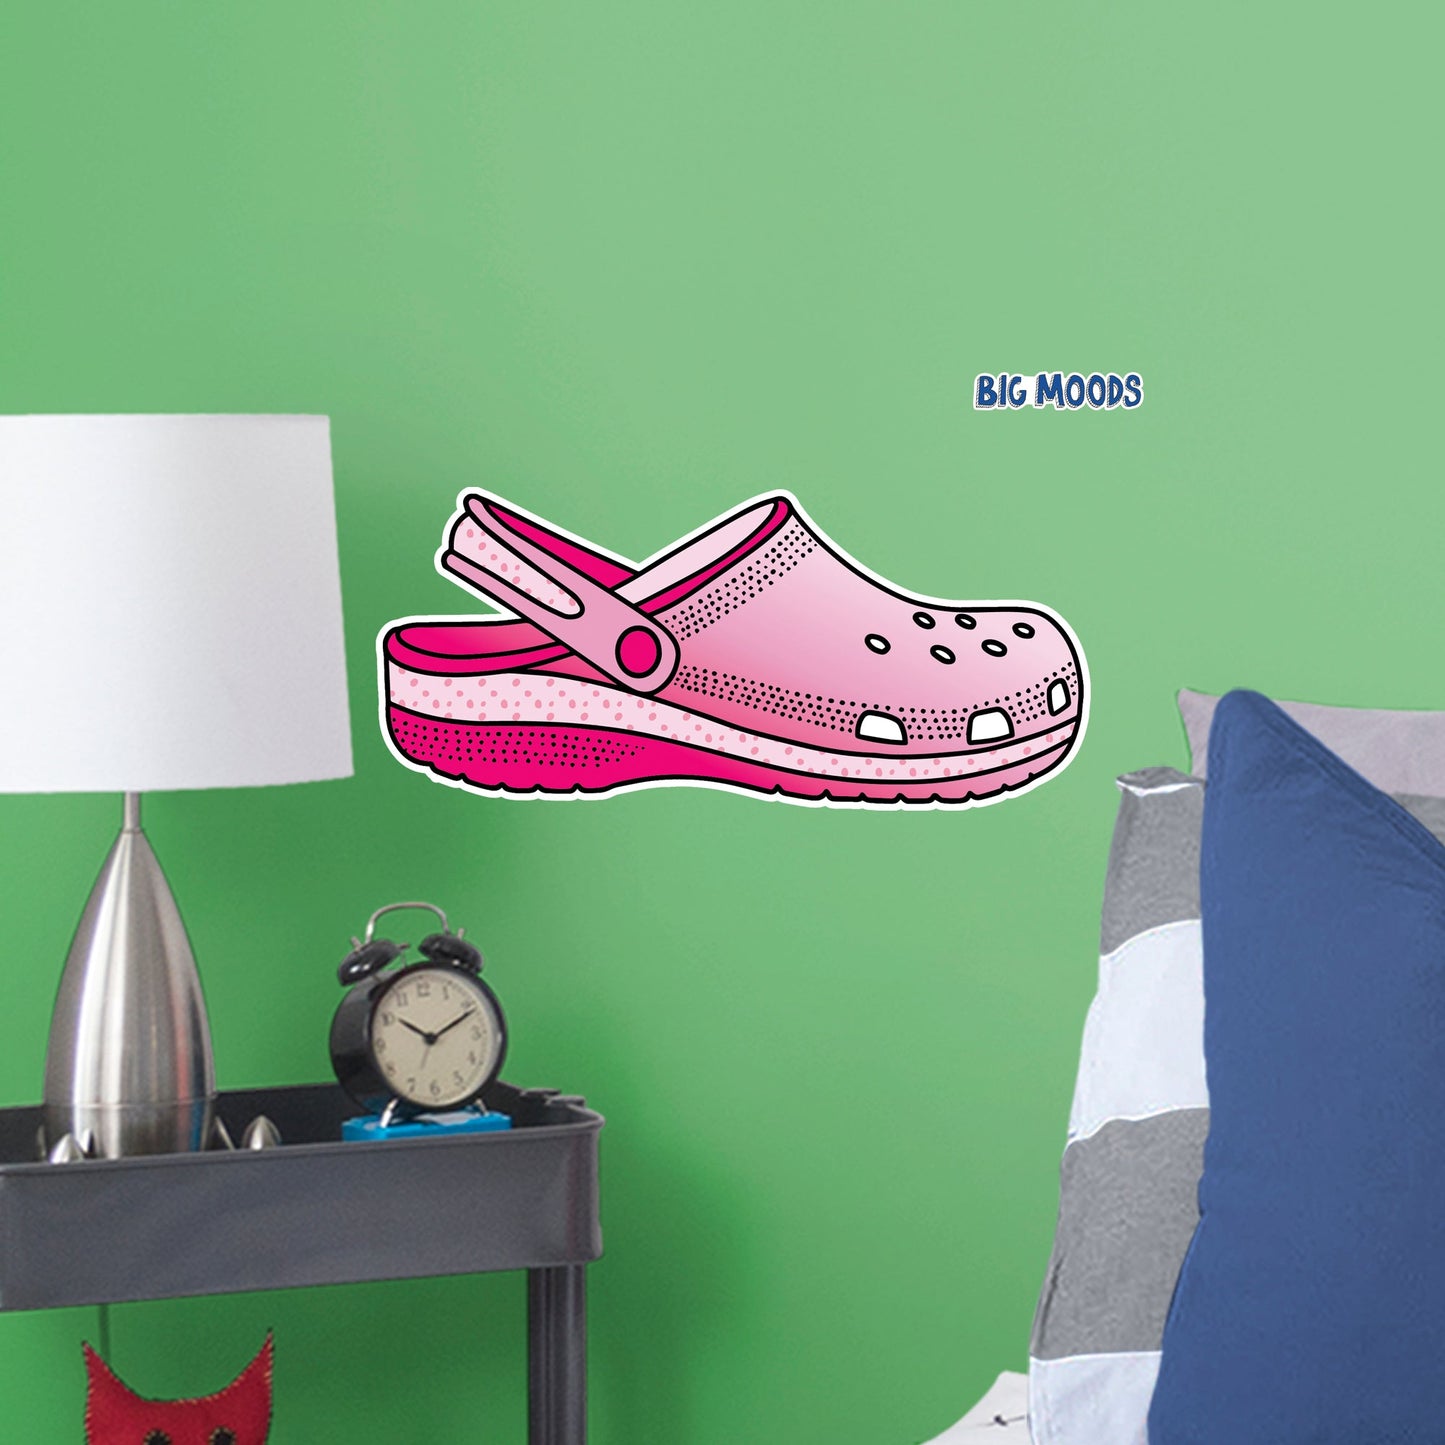 Slip On Sandal (Pink)        - Officially Licensed Big Moods Removable     Adhesive Decal